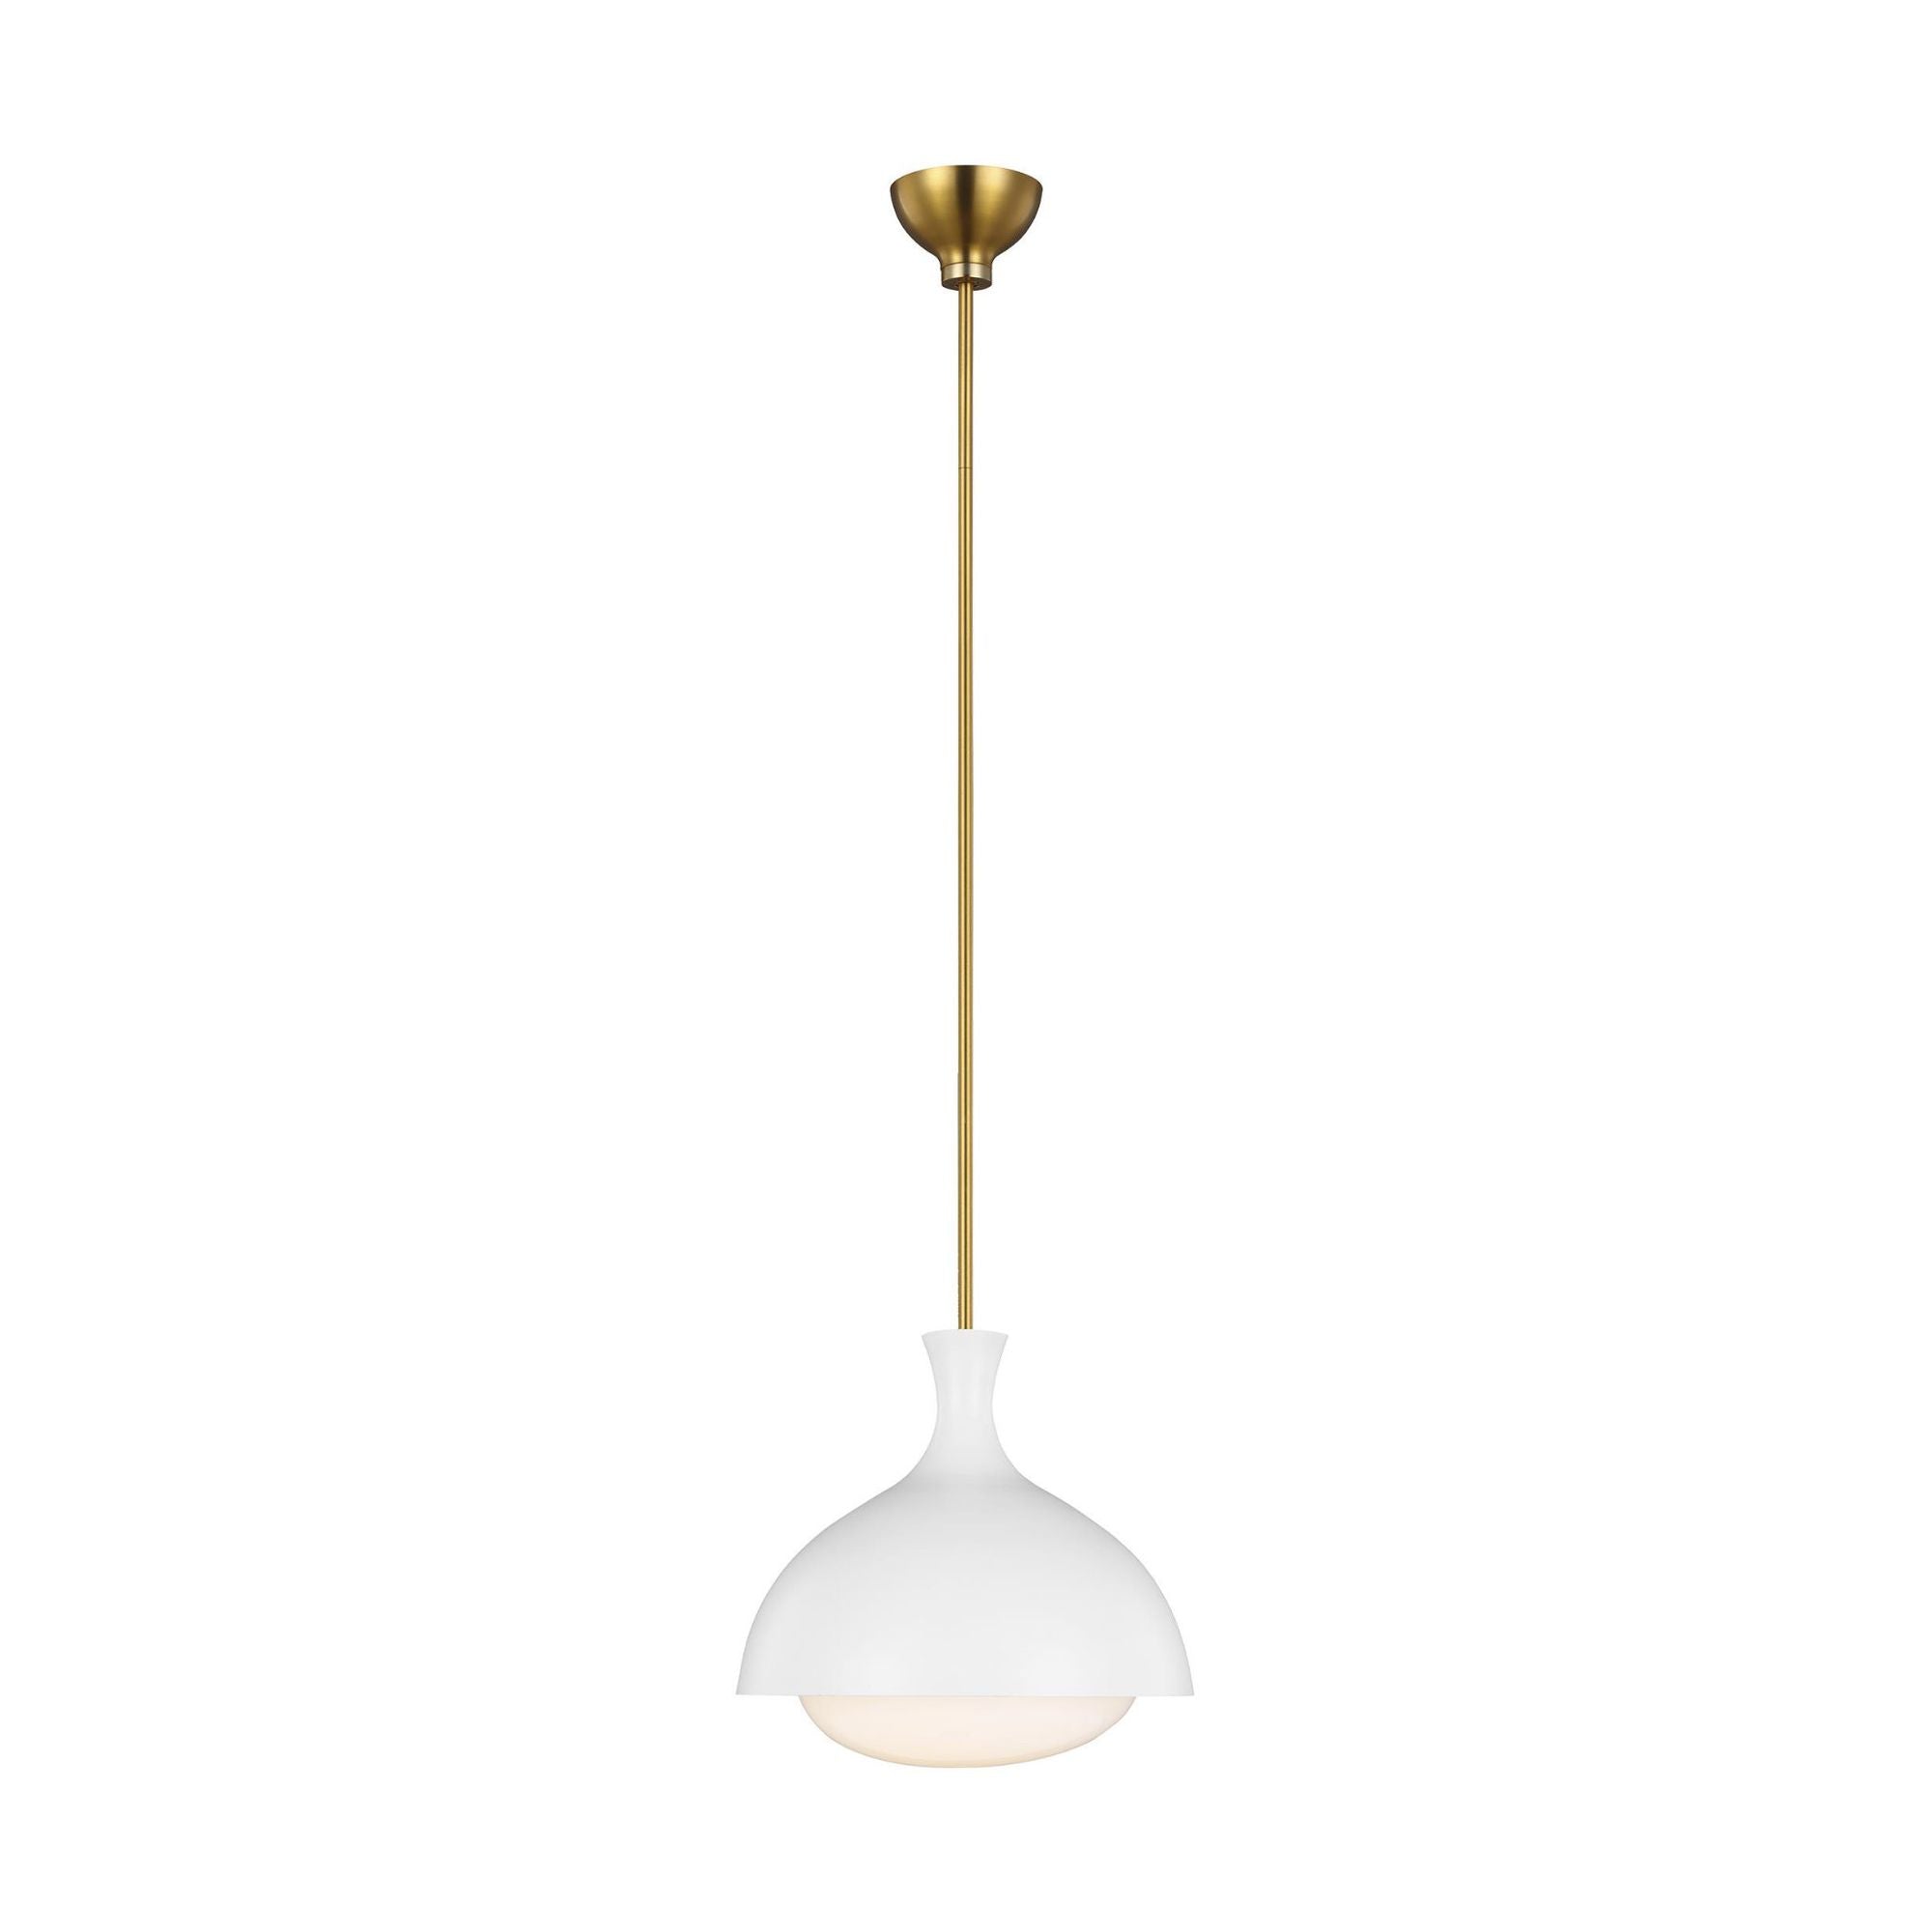 AERIN Lucerne One Light Medium Pendant in Matte White and Burnished Brass